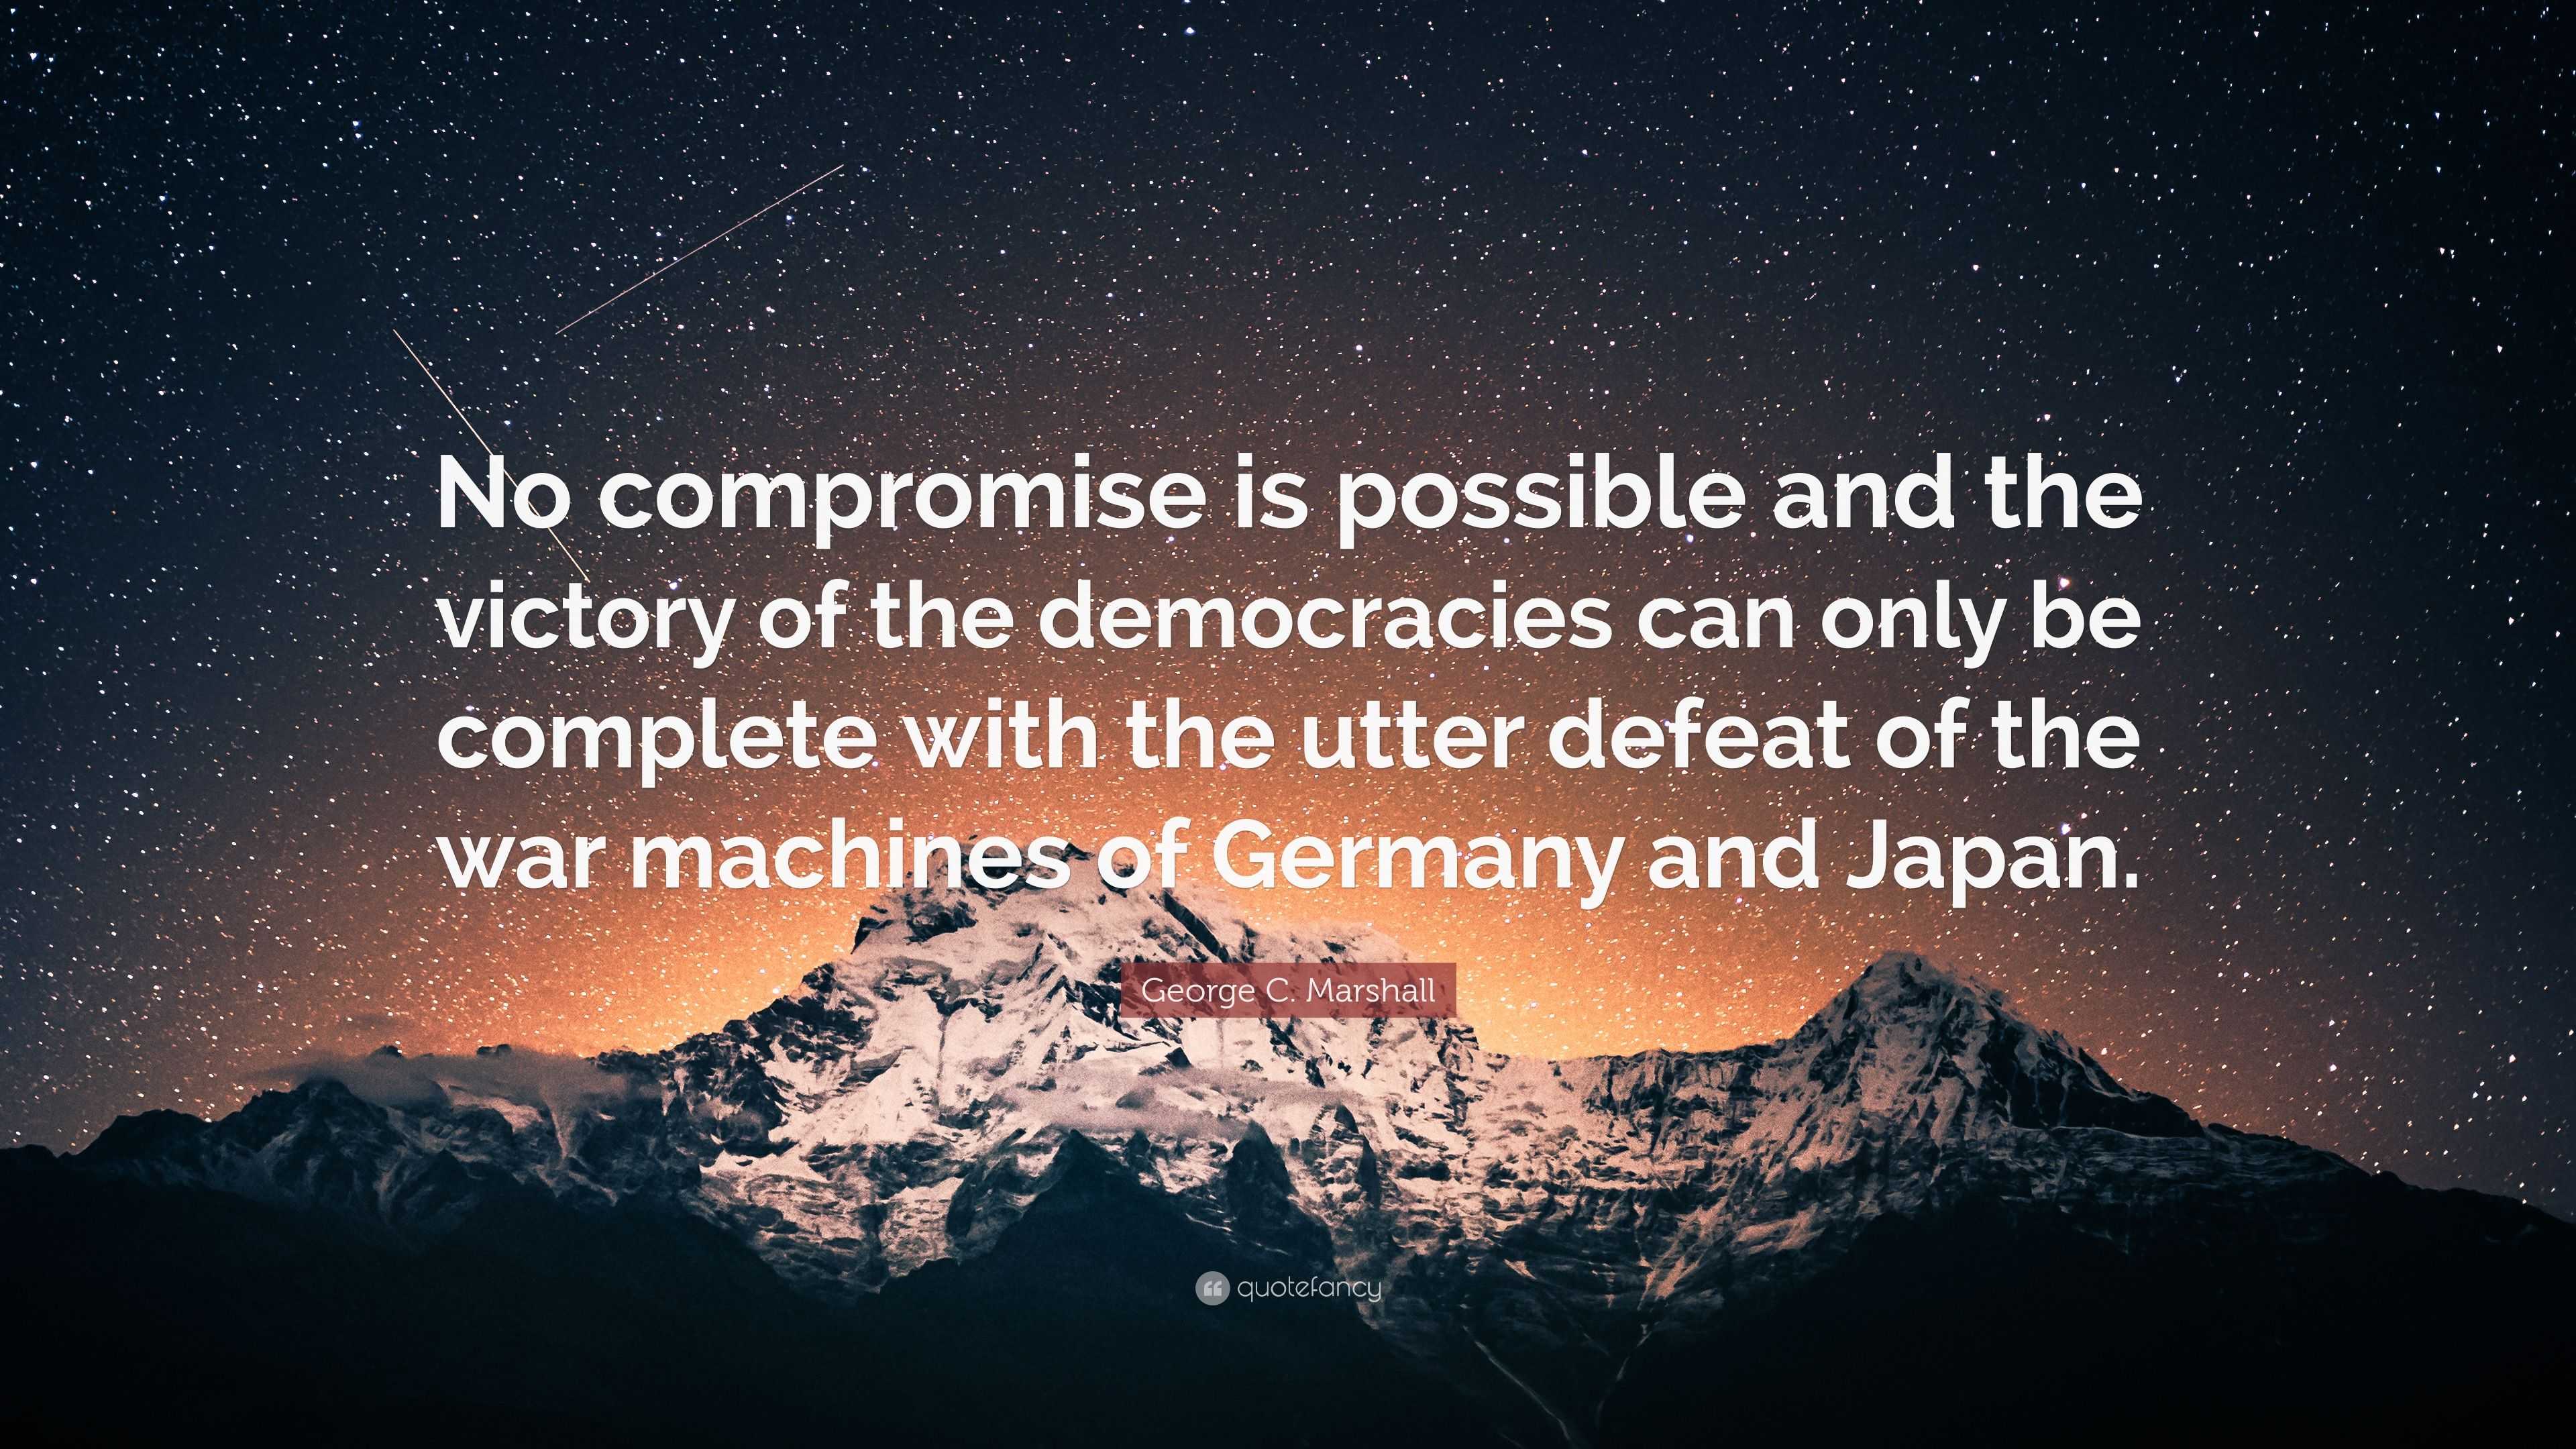 https://quotefancy.com/media/wallpaper/3840x2160/3470330-George-C-Marshall-Quote-No-compromise-is-possible-and-the-victory.jpg